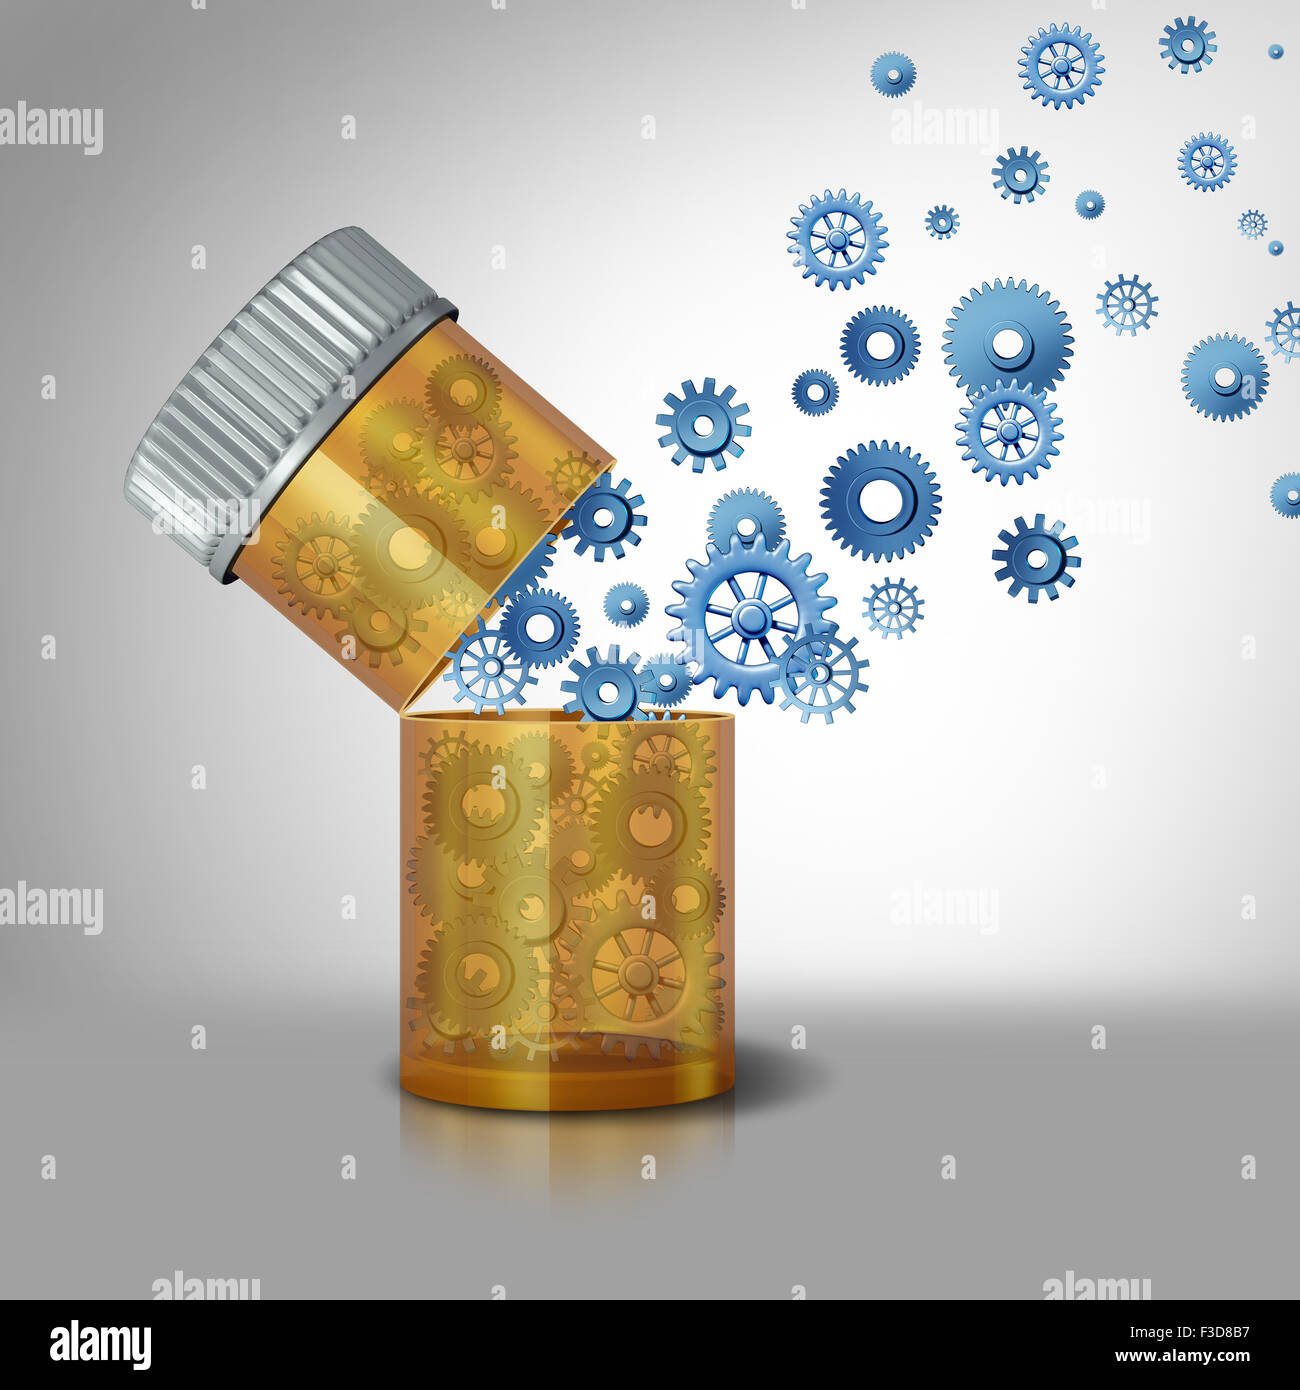 Pharmaceutical industry concept and precription drugs business symbol as an open pill bottle with gears and cog wheels flowing out as a metaphor for medication and medicine inner workings. Stock Photo